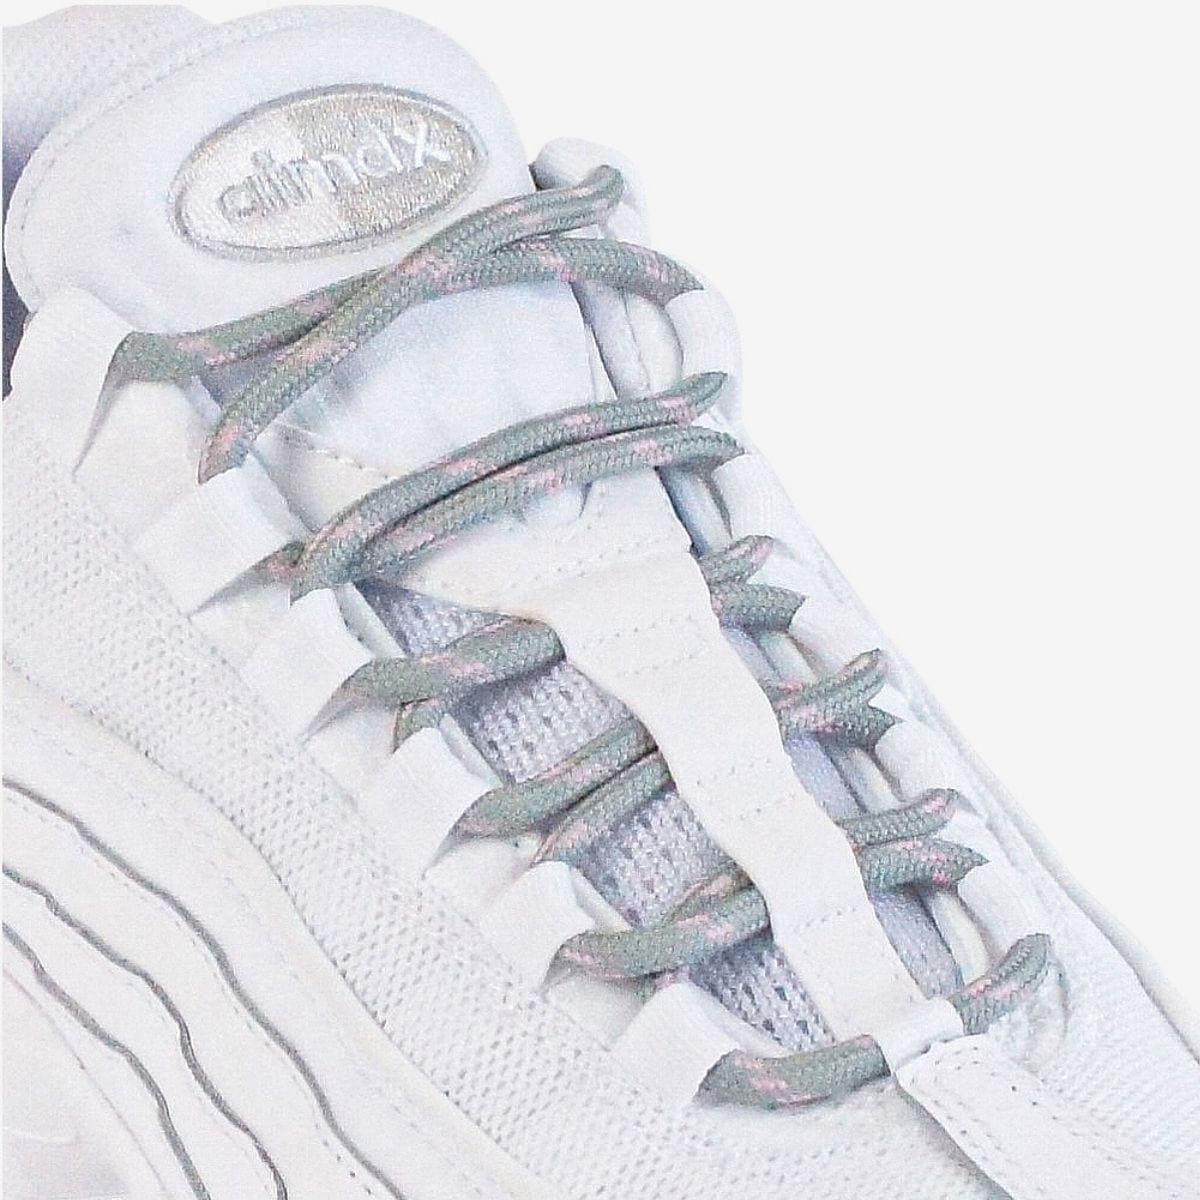 walking-shoe-laces-online-in-australia-colour-light-grey-and-pink